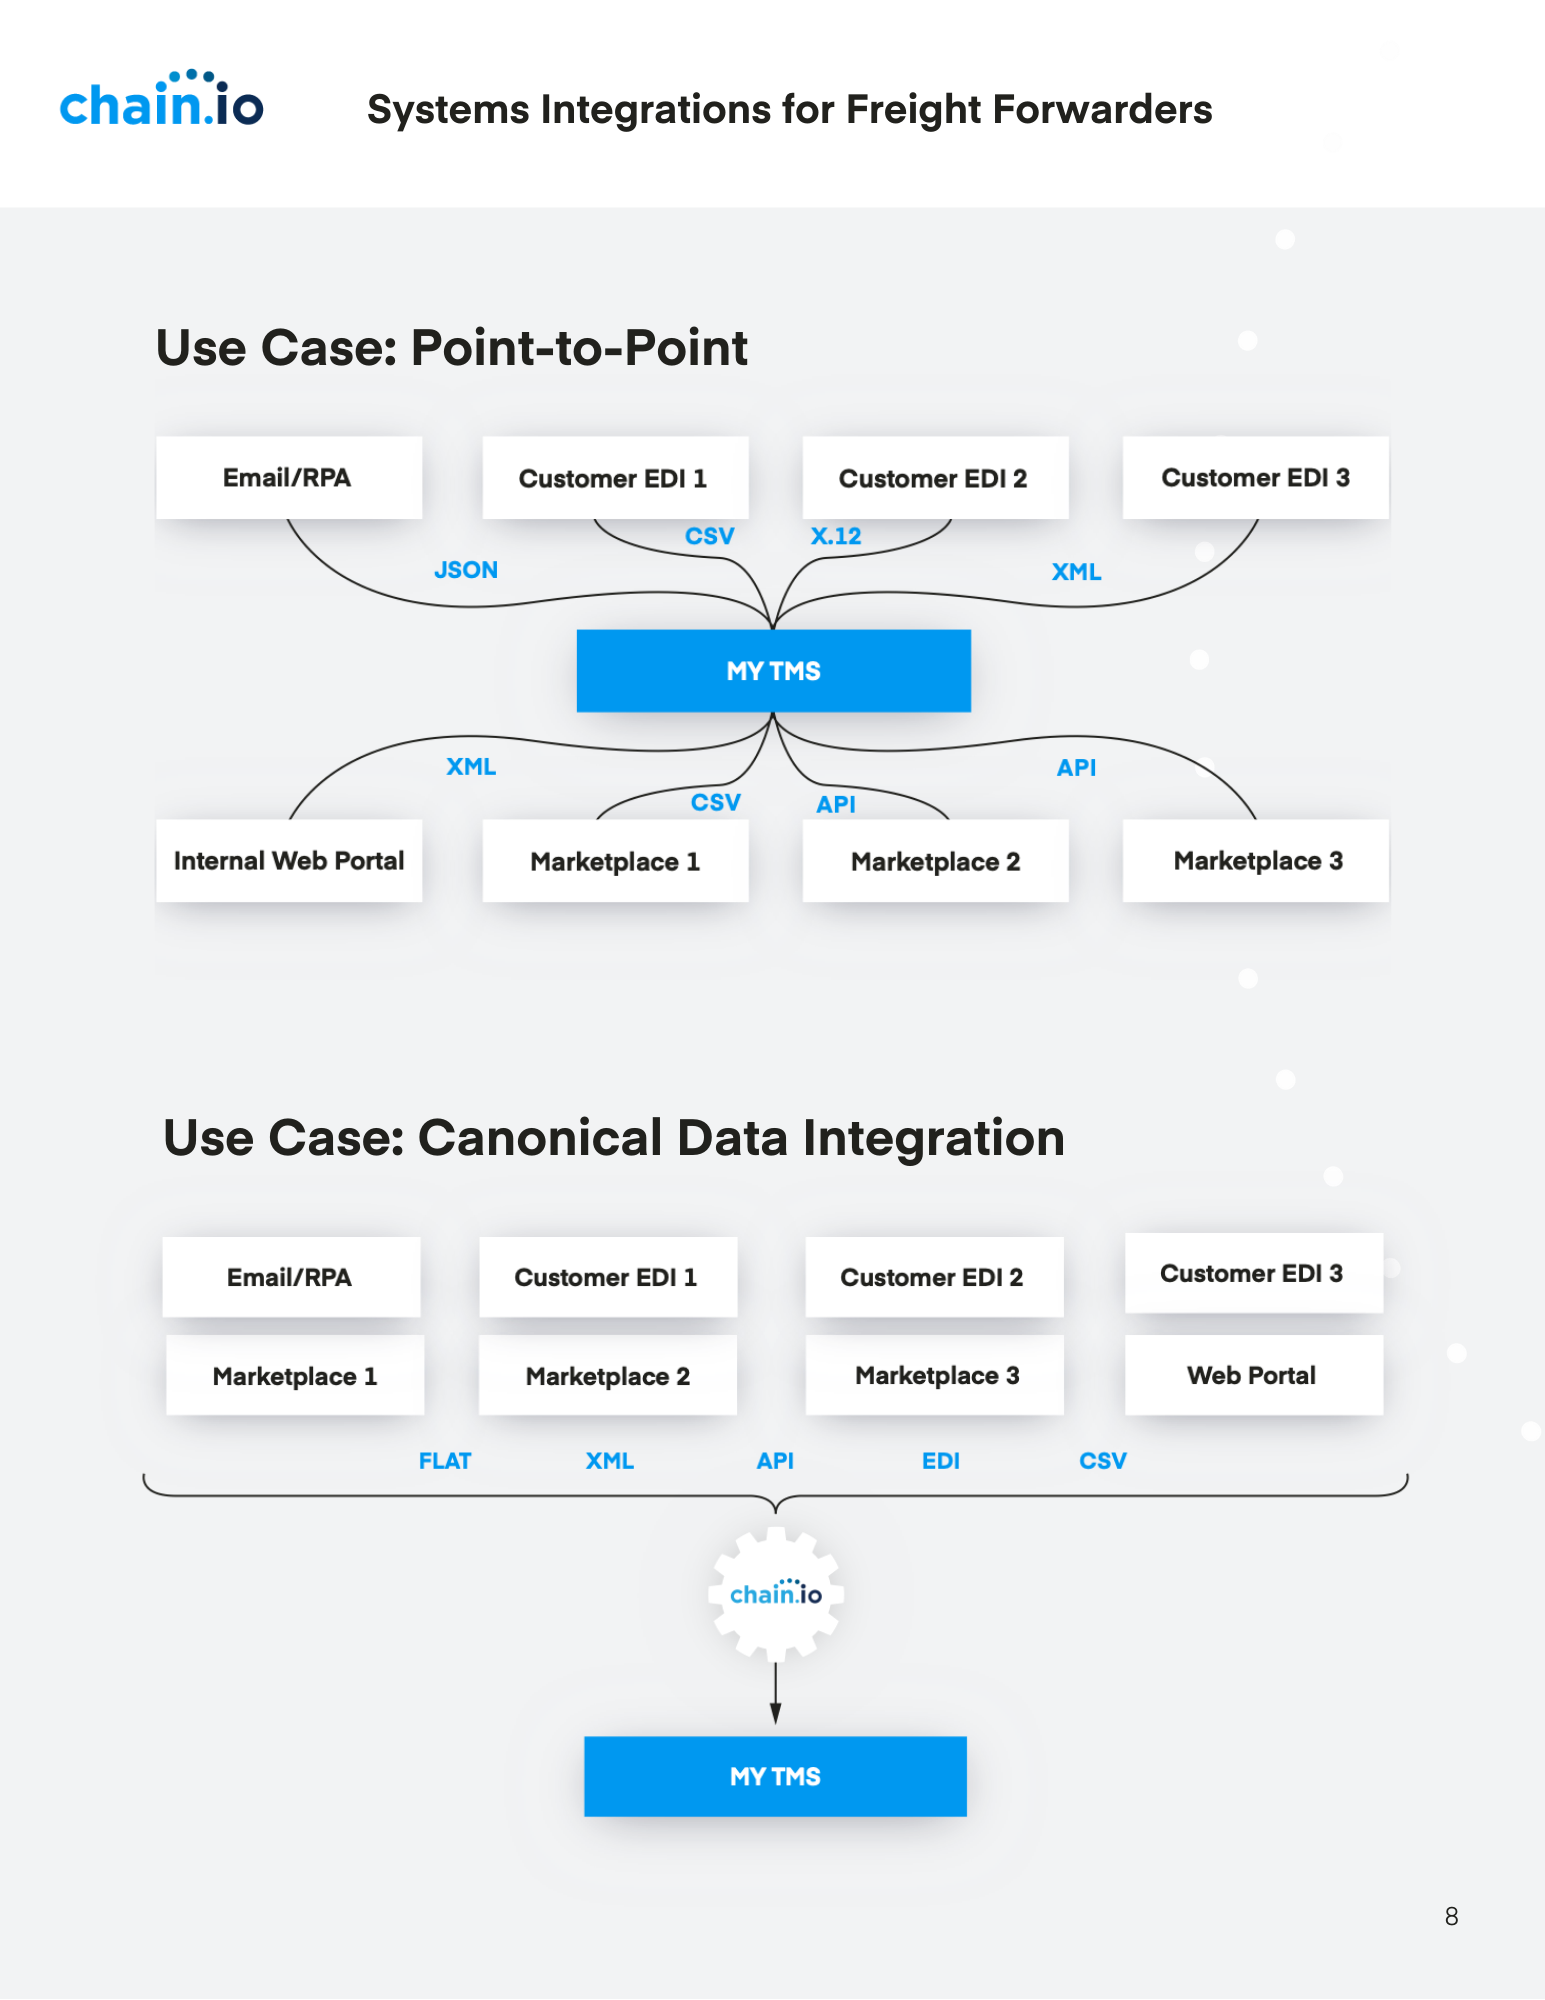 use cases for point-to-point supply chain integrations and canonical data integrations